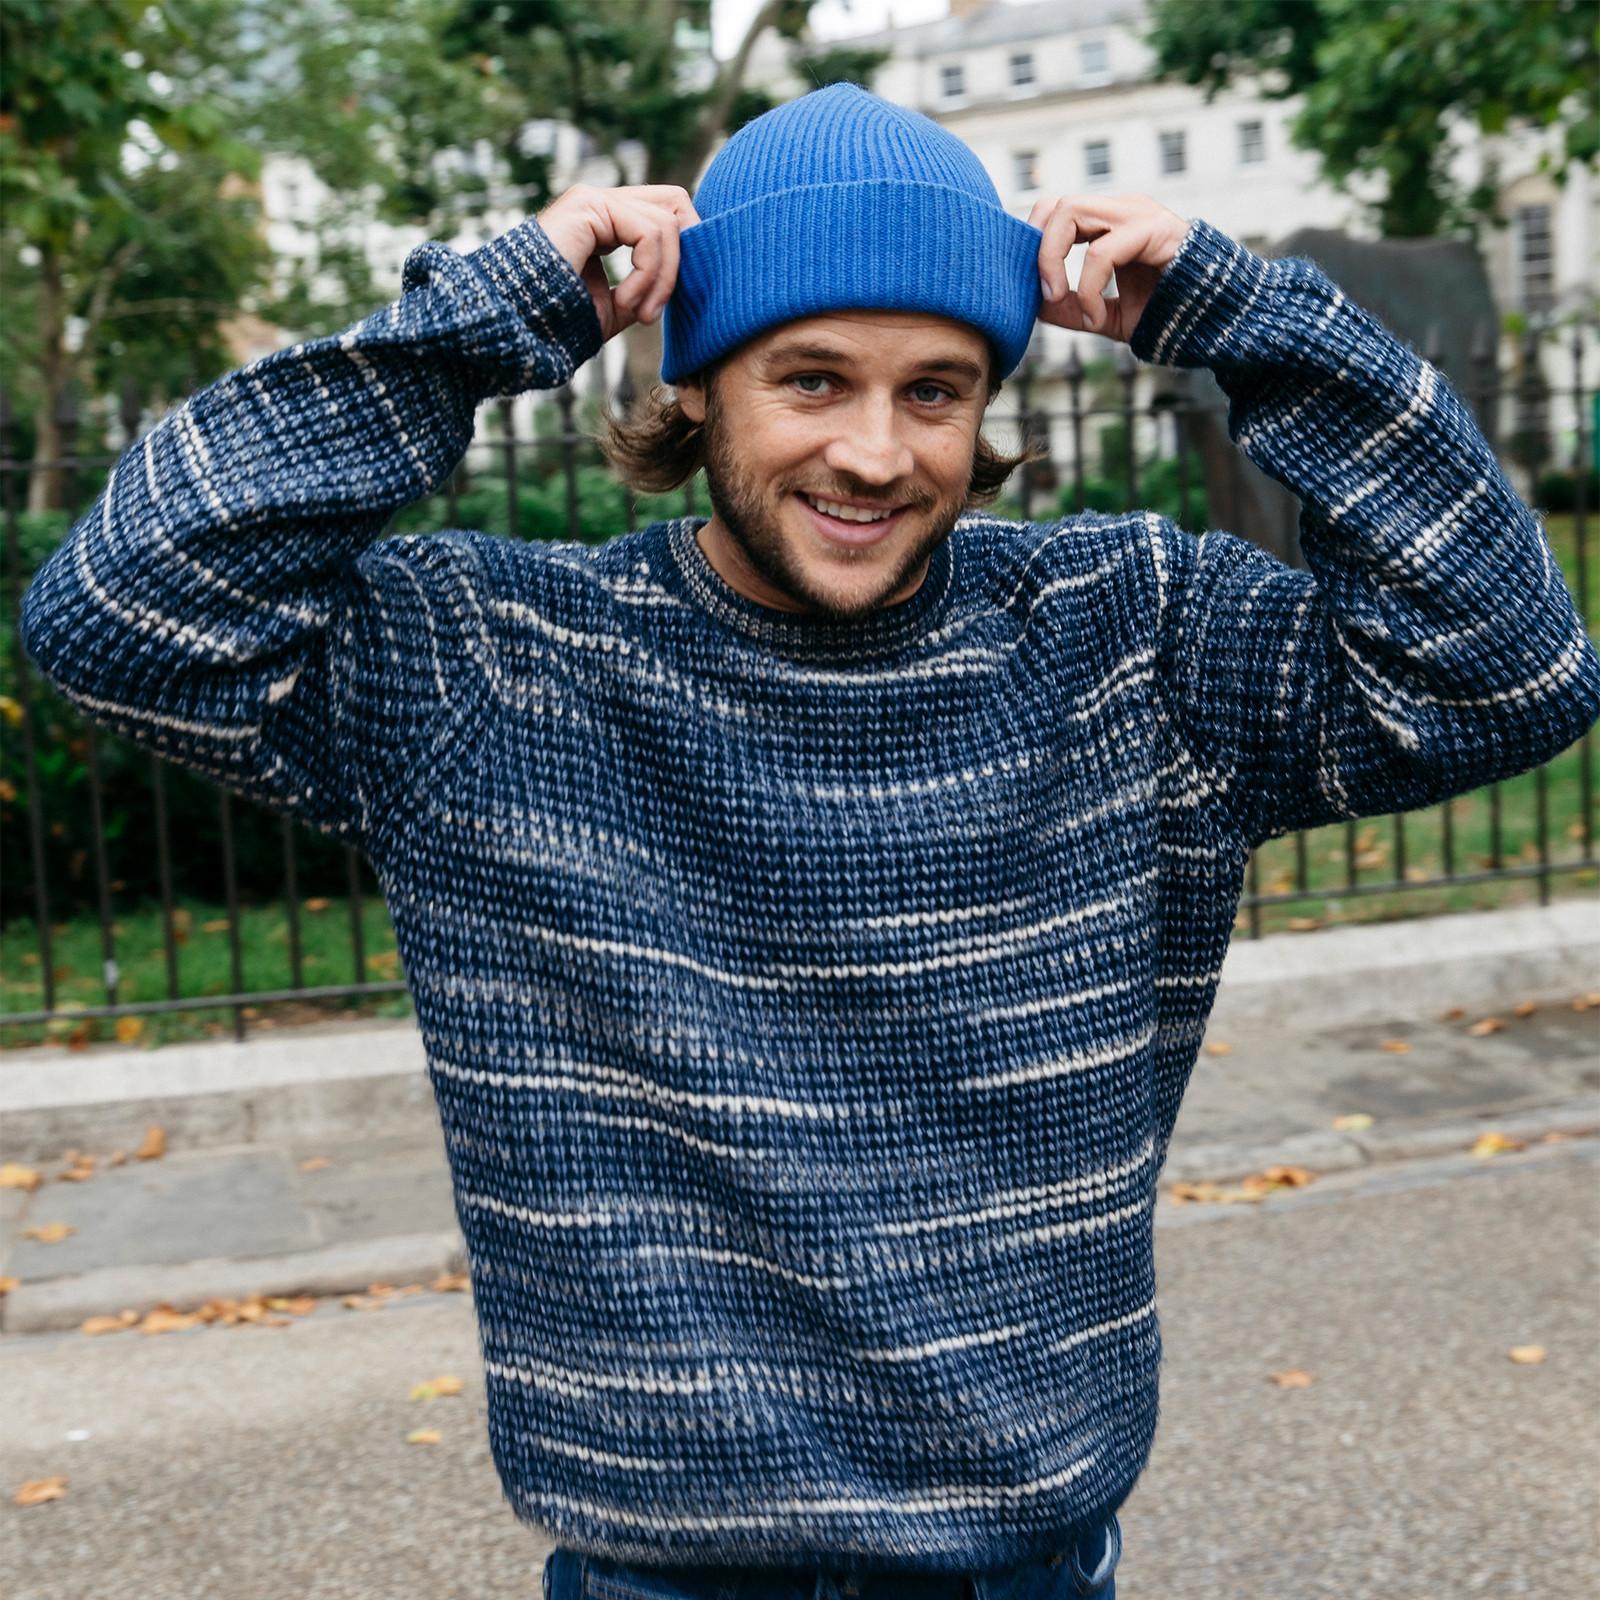 Layer Up in Style With Our Men's Knitwear